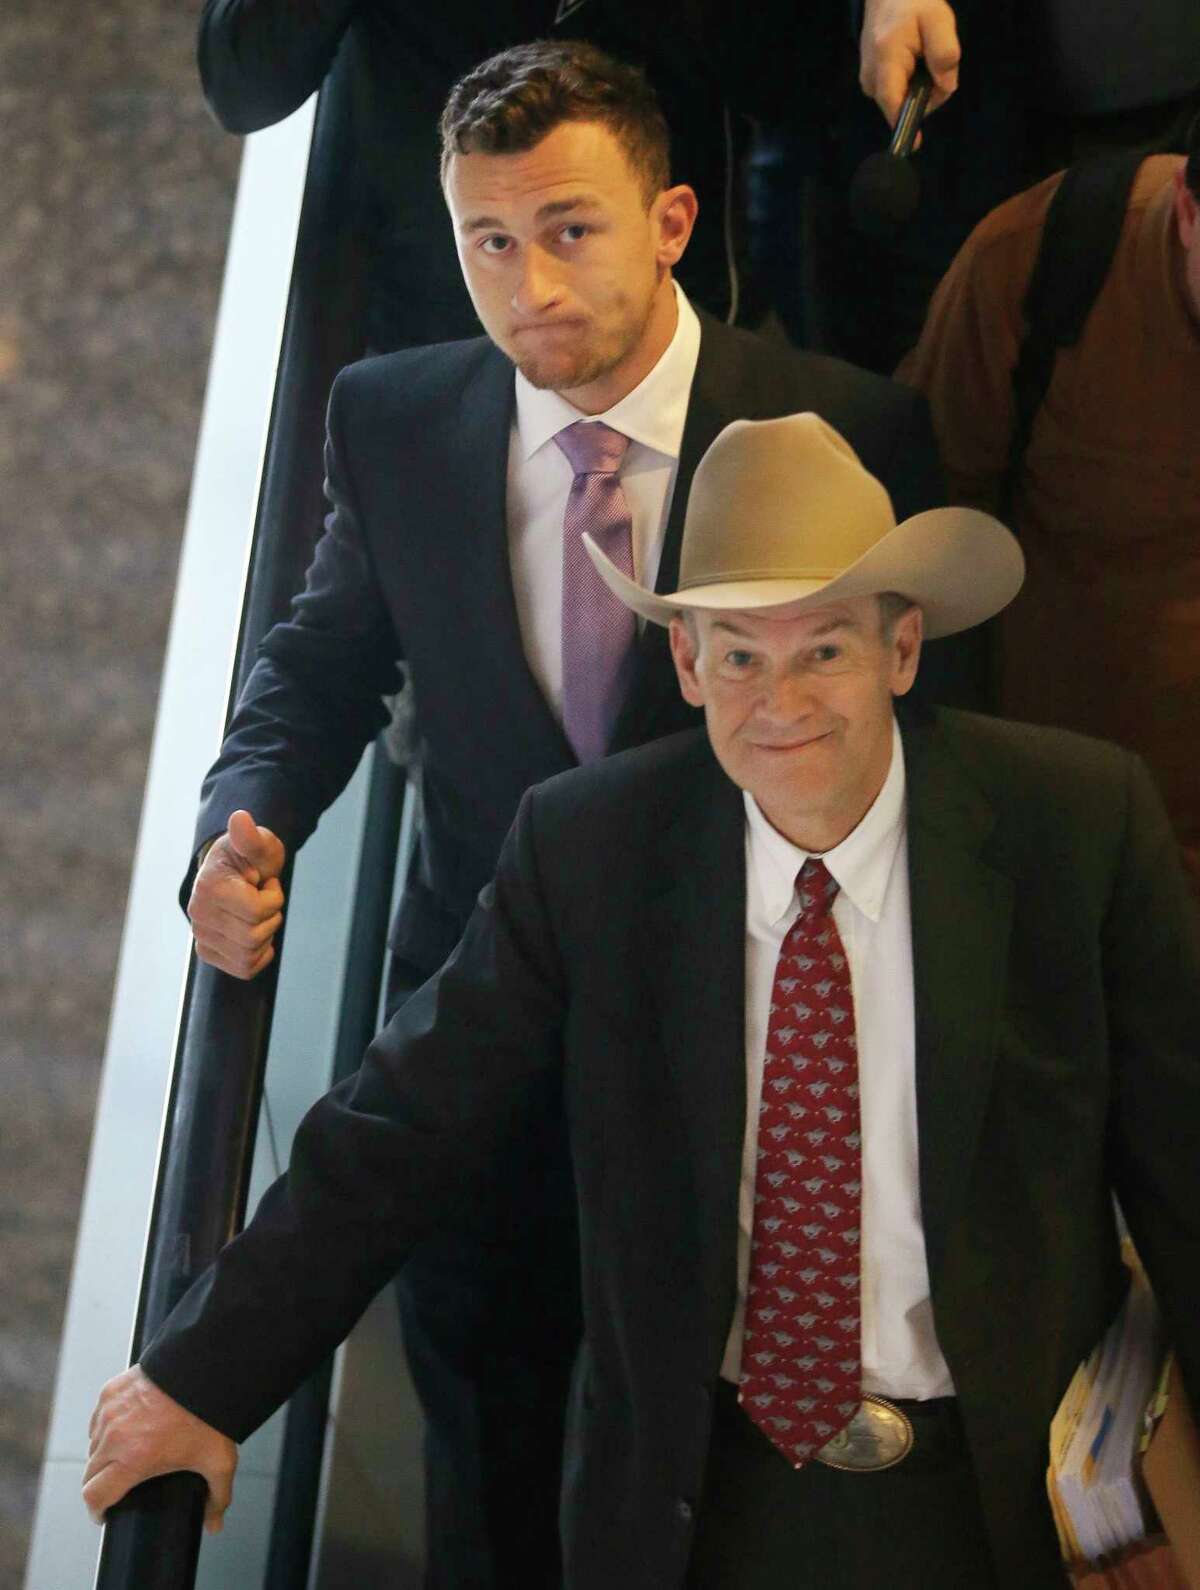 Former NFL quarterback Johnny Manziel, left, leaves a courthouse with his lawyer Jim Darnell after a hearing in Dallas, Tuesday, Feb. 28, 2017. A Dallas County judge ordered Manziel to be at the hearing to address concerned about reports that he has violated terms of a plea agreement for a domestic violence case. (AP Photo/LM Otero)